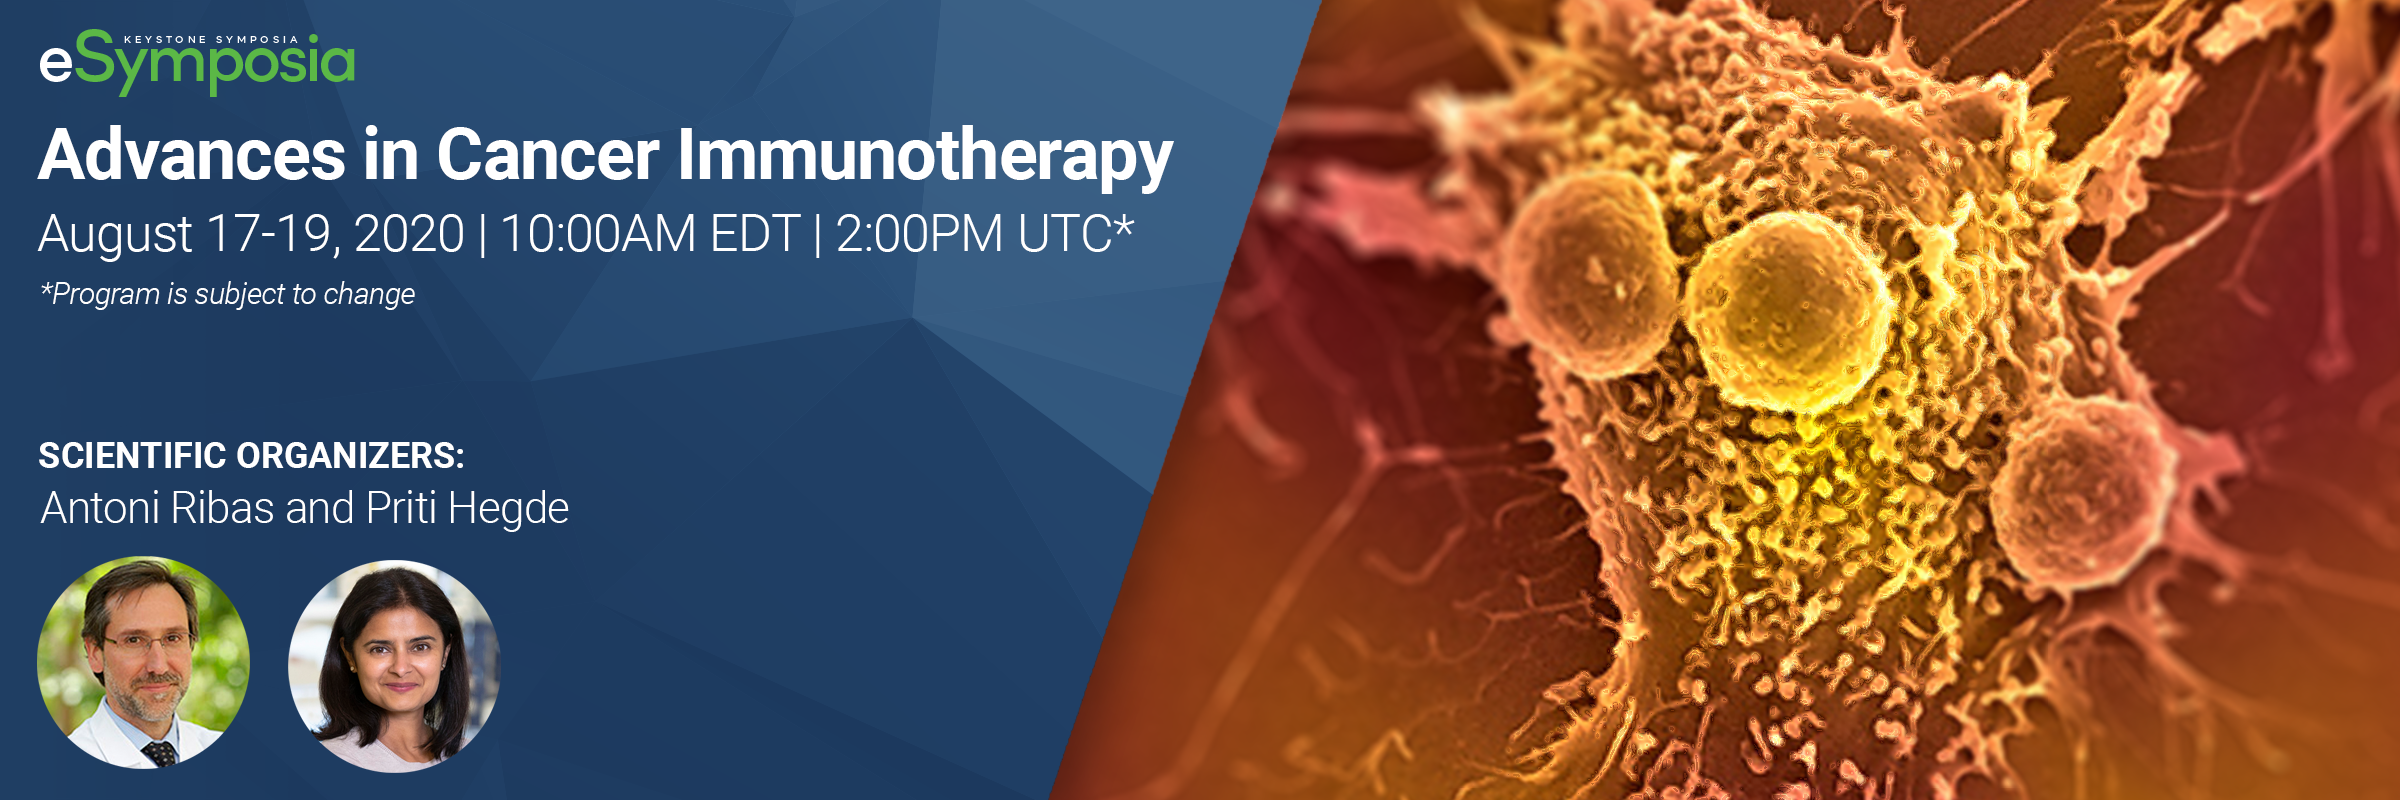 Advances in Cancer Immunotherapy eSymposia | Join us August 17th, 2020